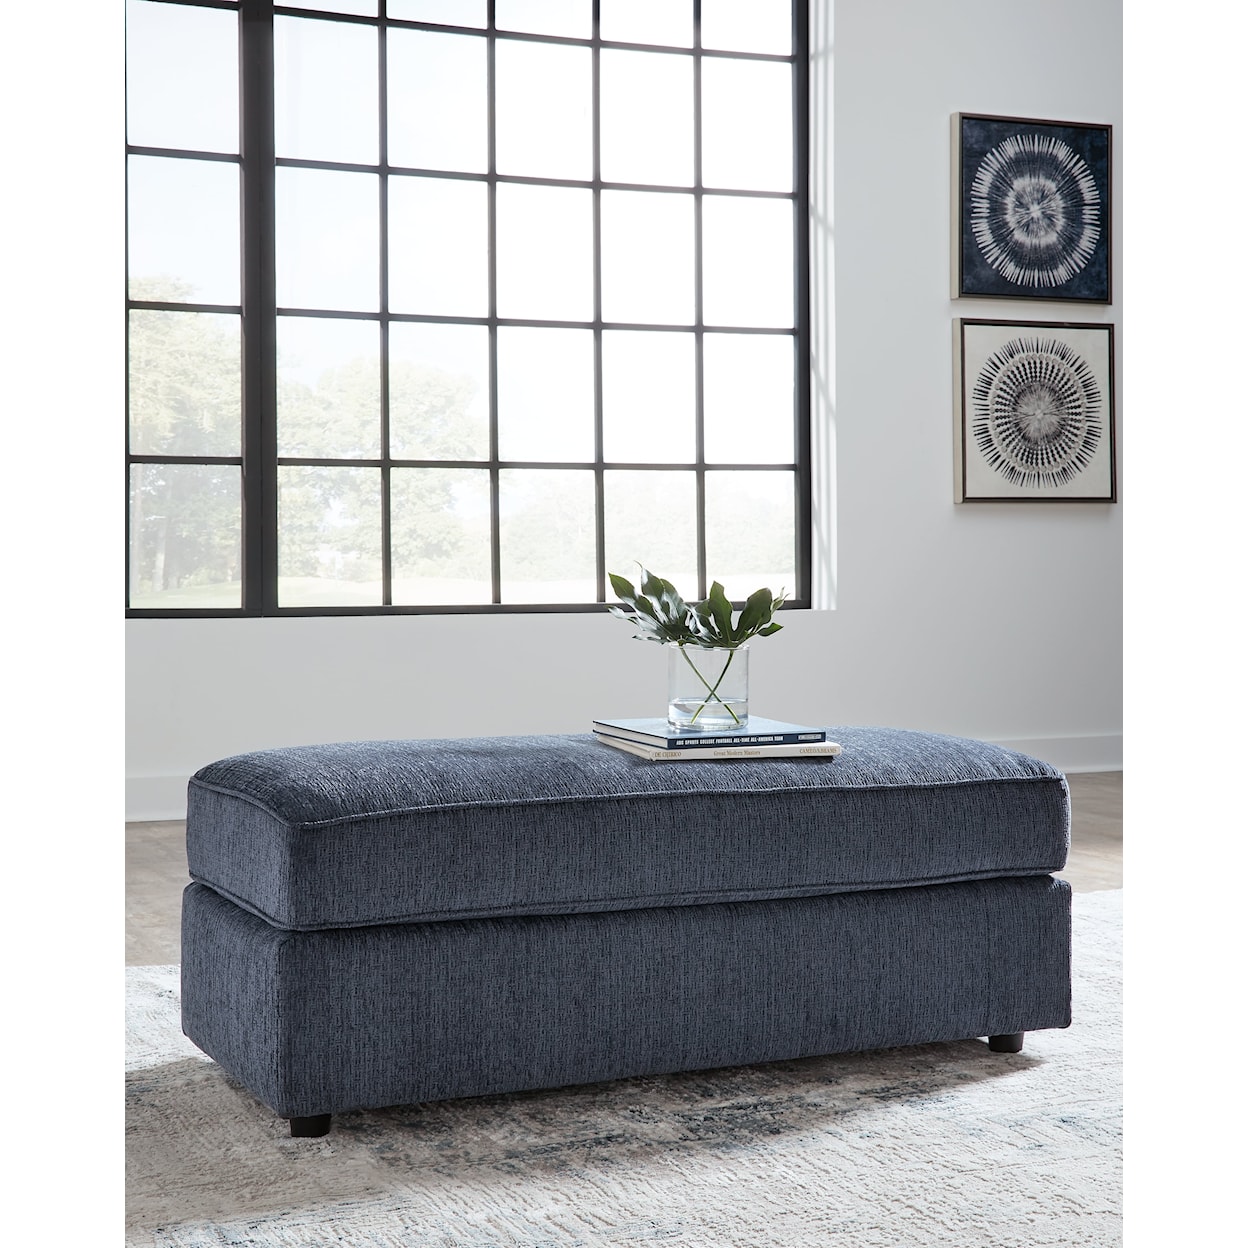 Signature Design by Ashley Albar Place Oversized Accent Ottoman